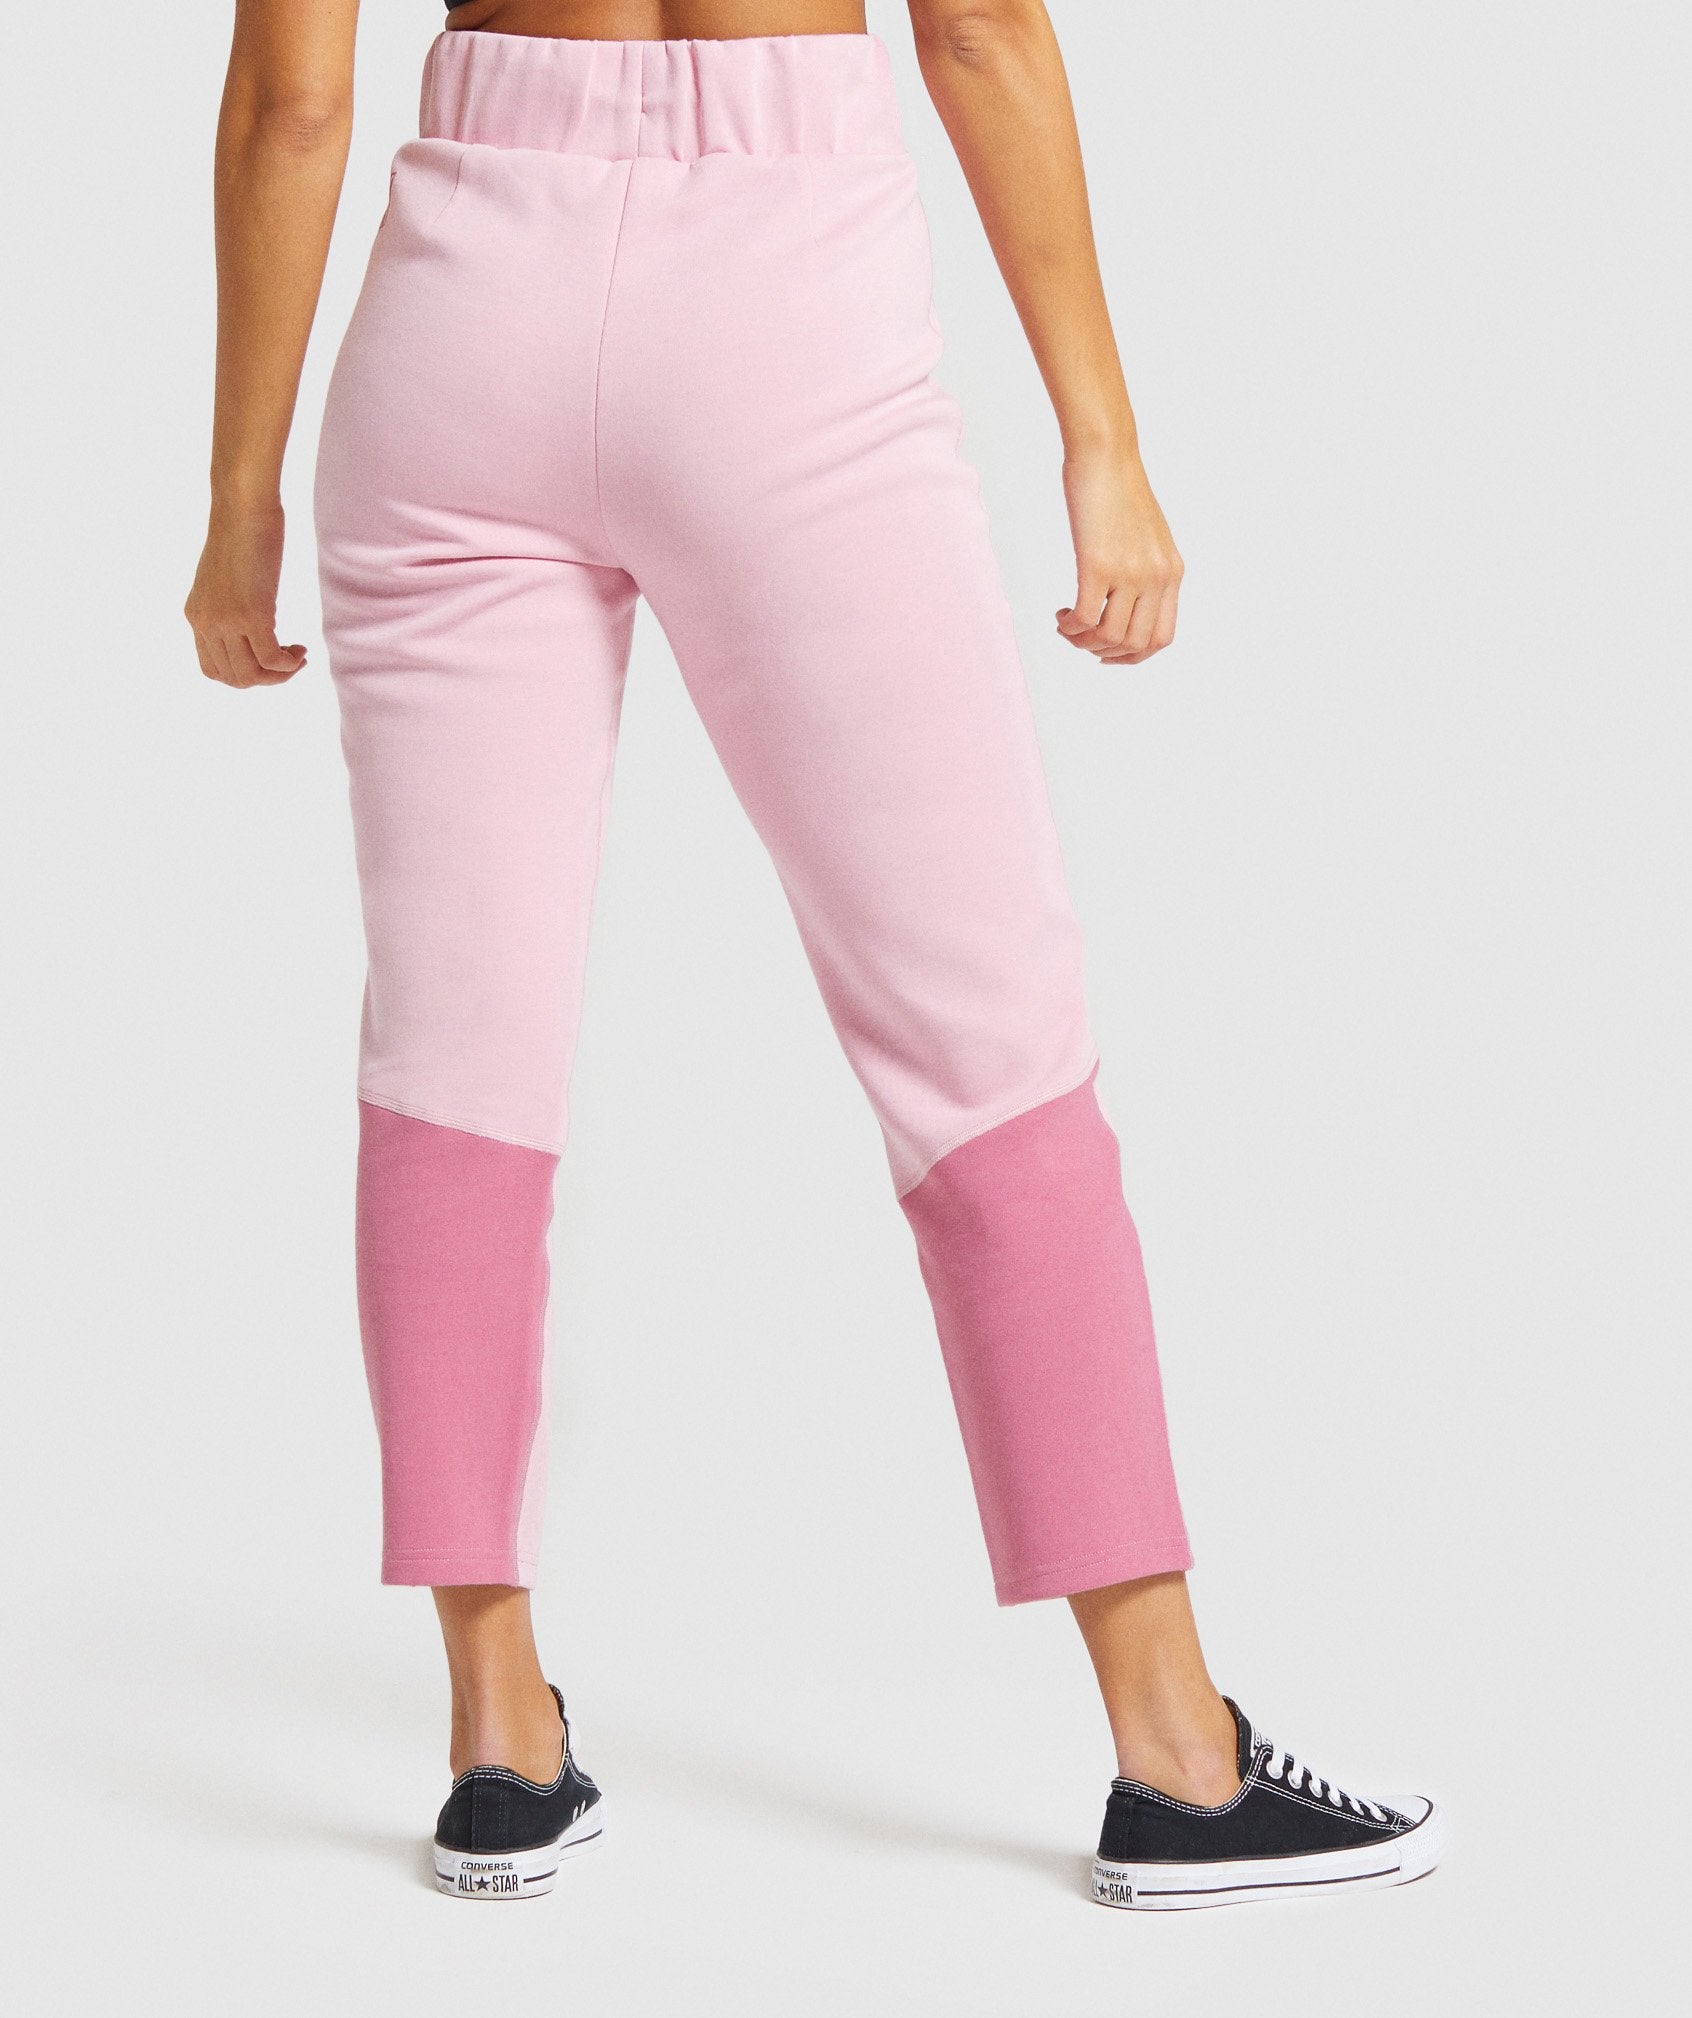 Rewind Joggers in Pink